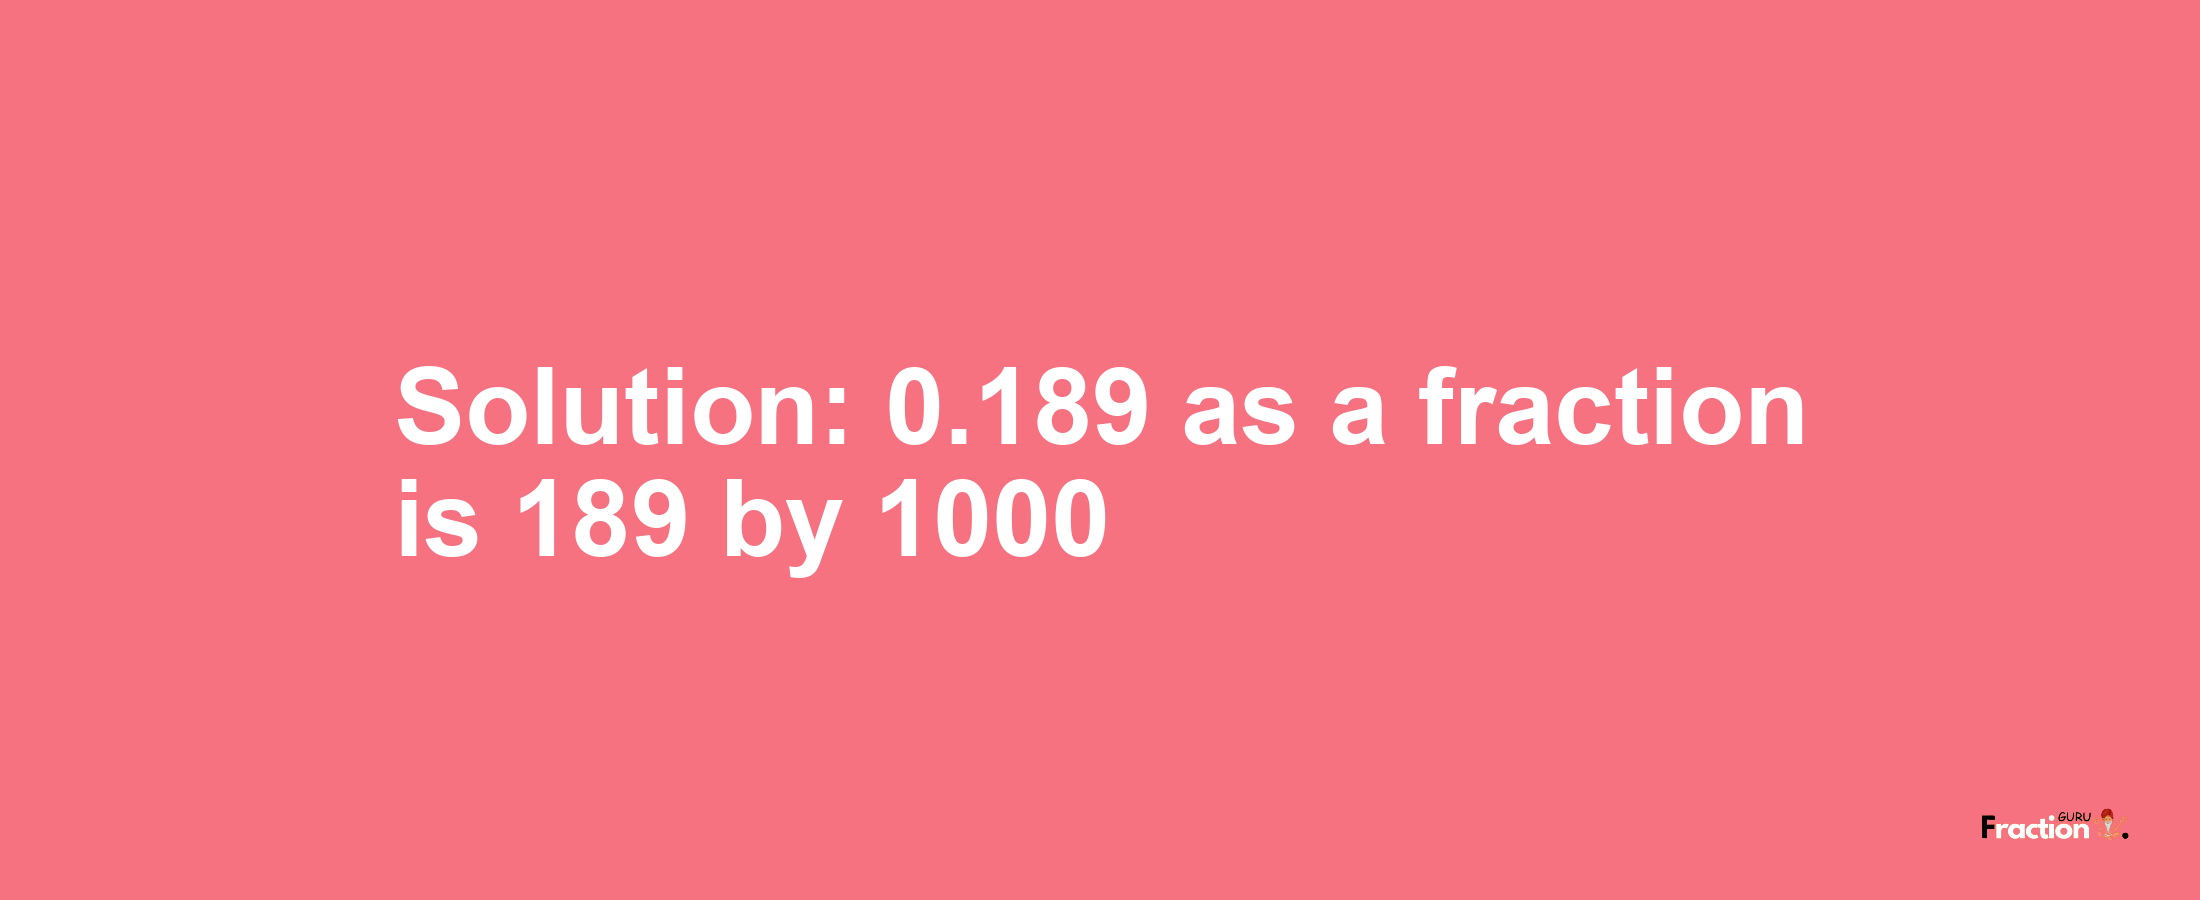 Solution:0.189 as a fraction is 189/1000